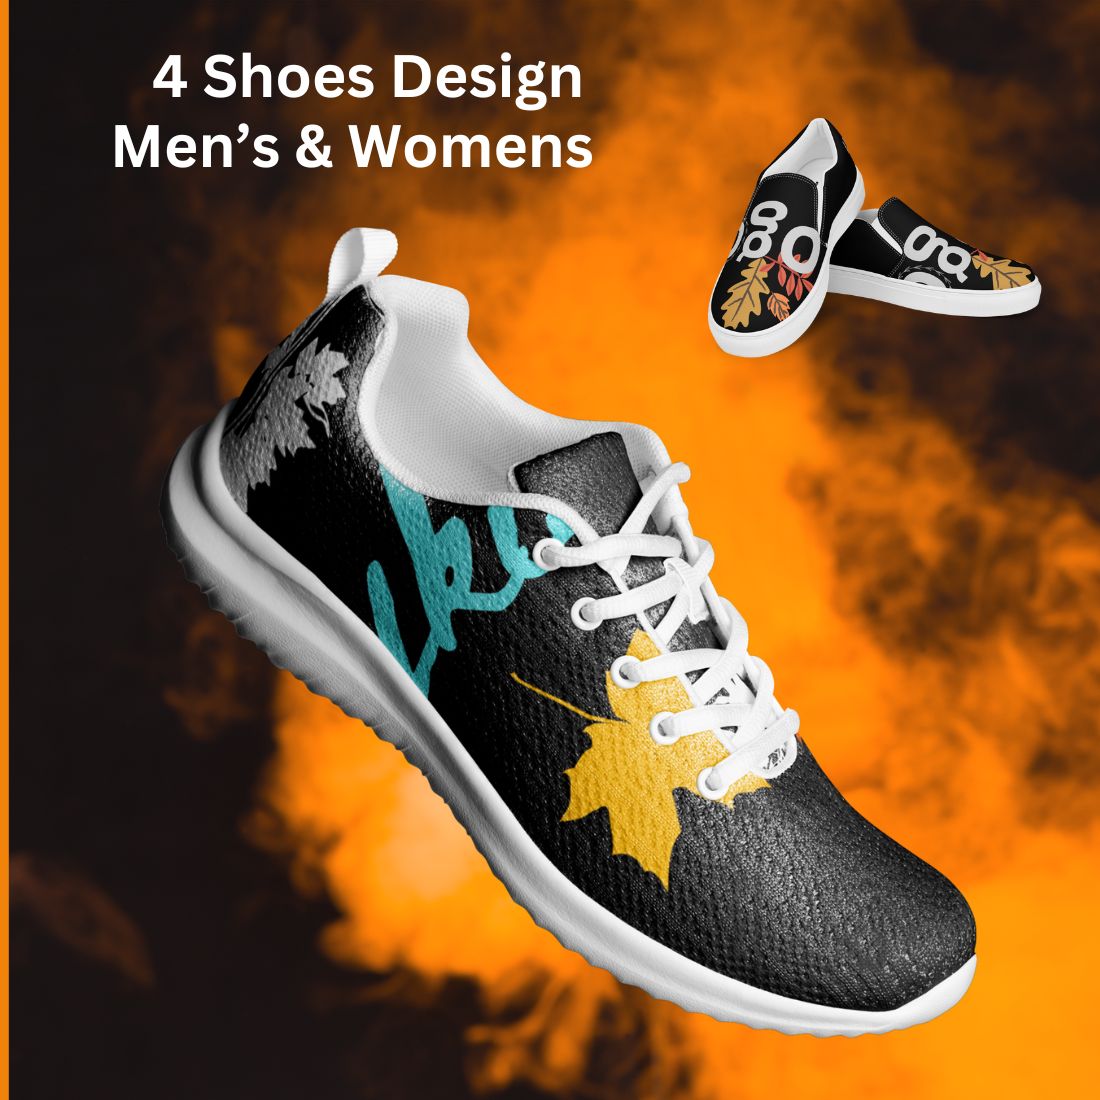 Shoes for Men's & Women Wear Design pattern Buy now preview image.